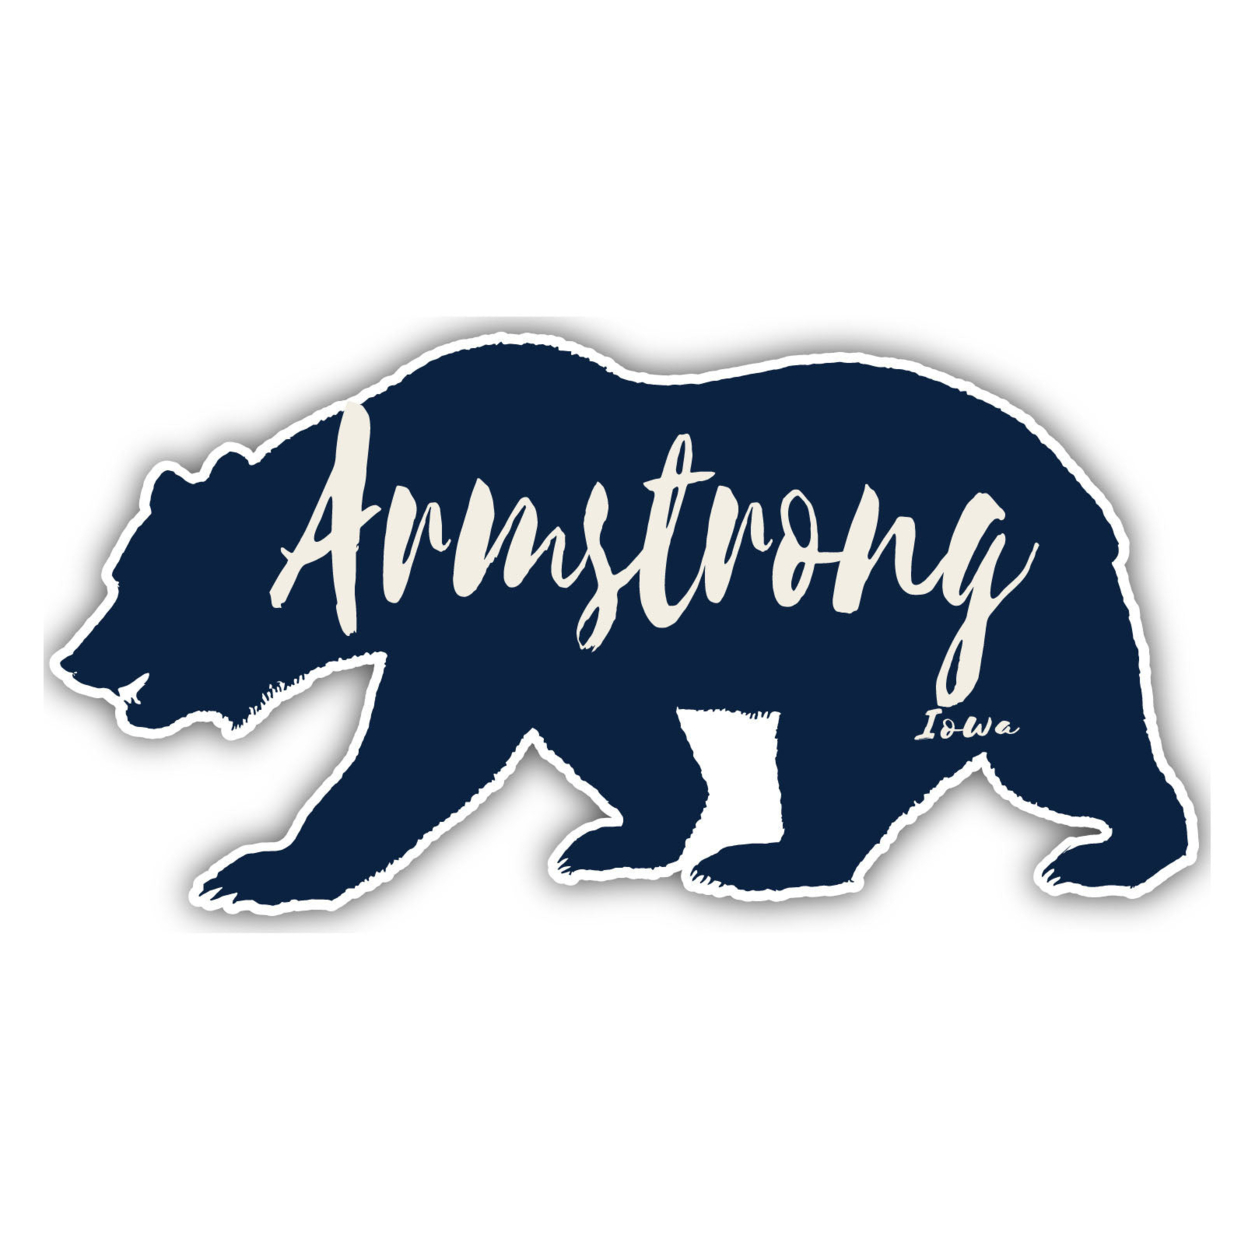 Armstrong Iowa Souvenir Decorative Stickers (Choose Theme And Size) - Single Unit, 12-Inch, Bear